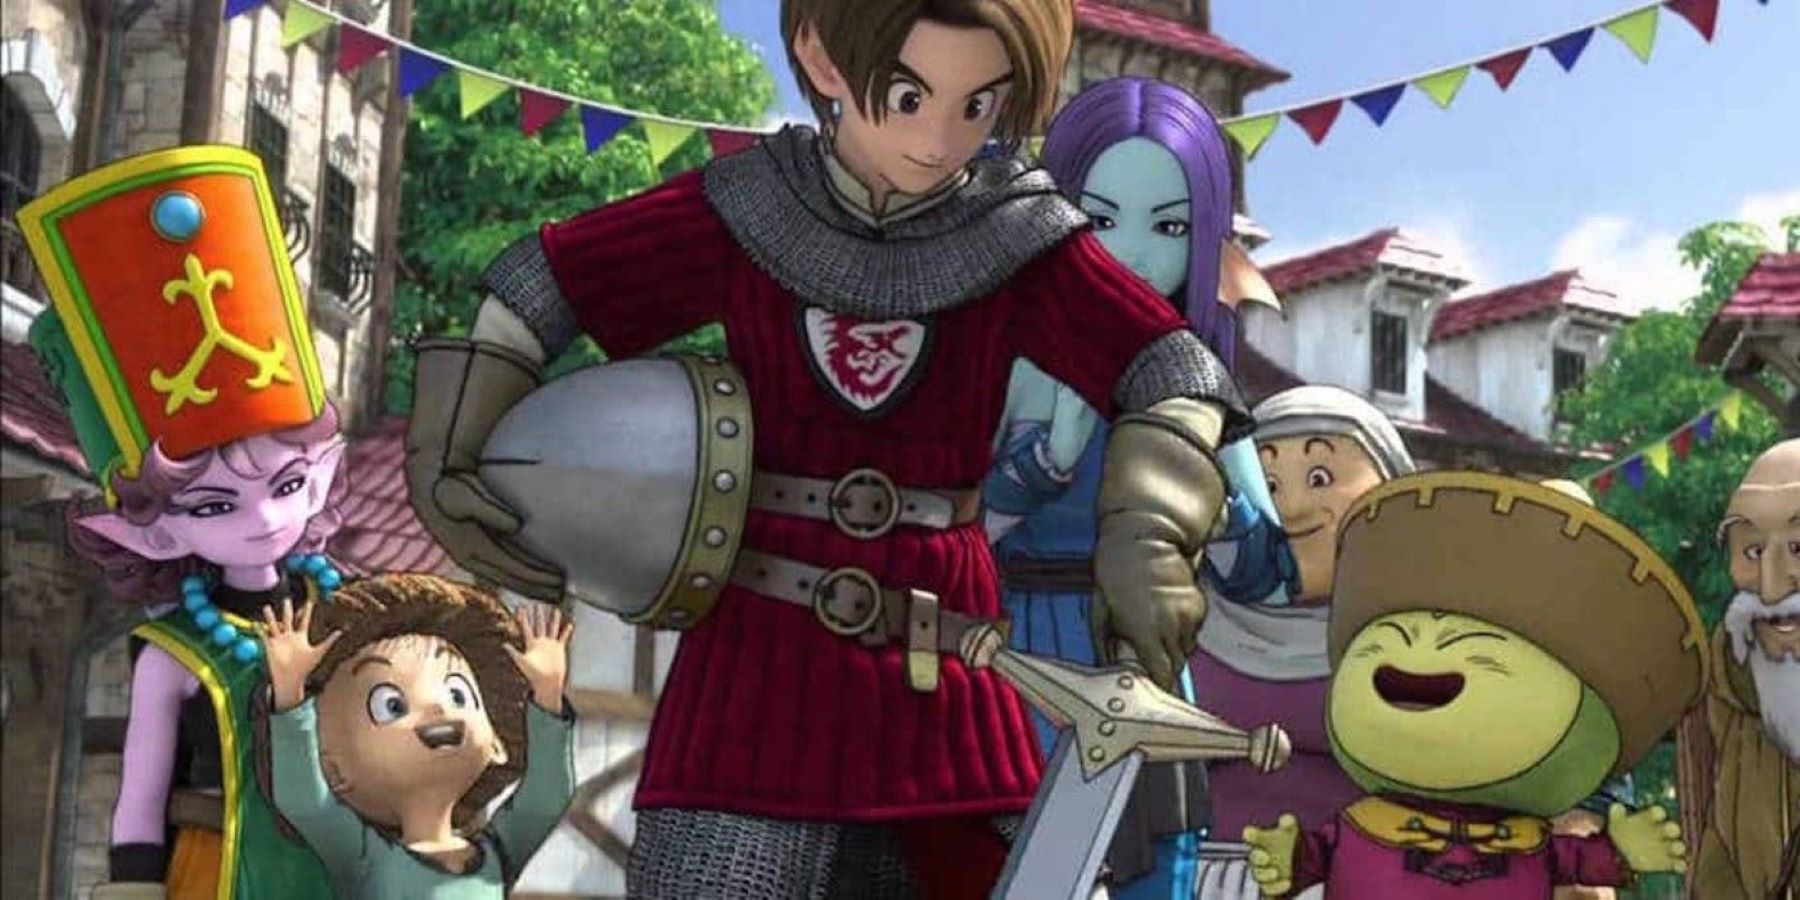 The human protagonist of Dragon Quest 10: Awakening of the Five Tribes wearing armor and surrounded by friends